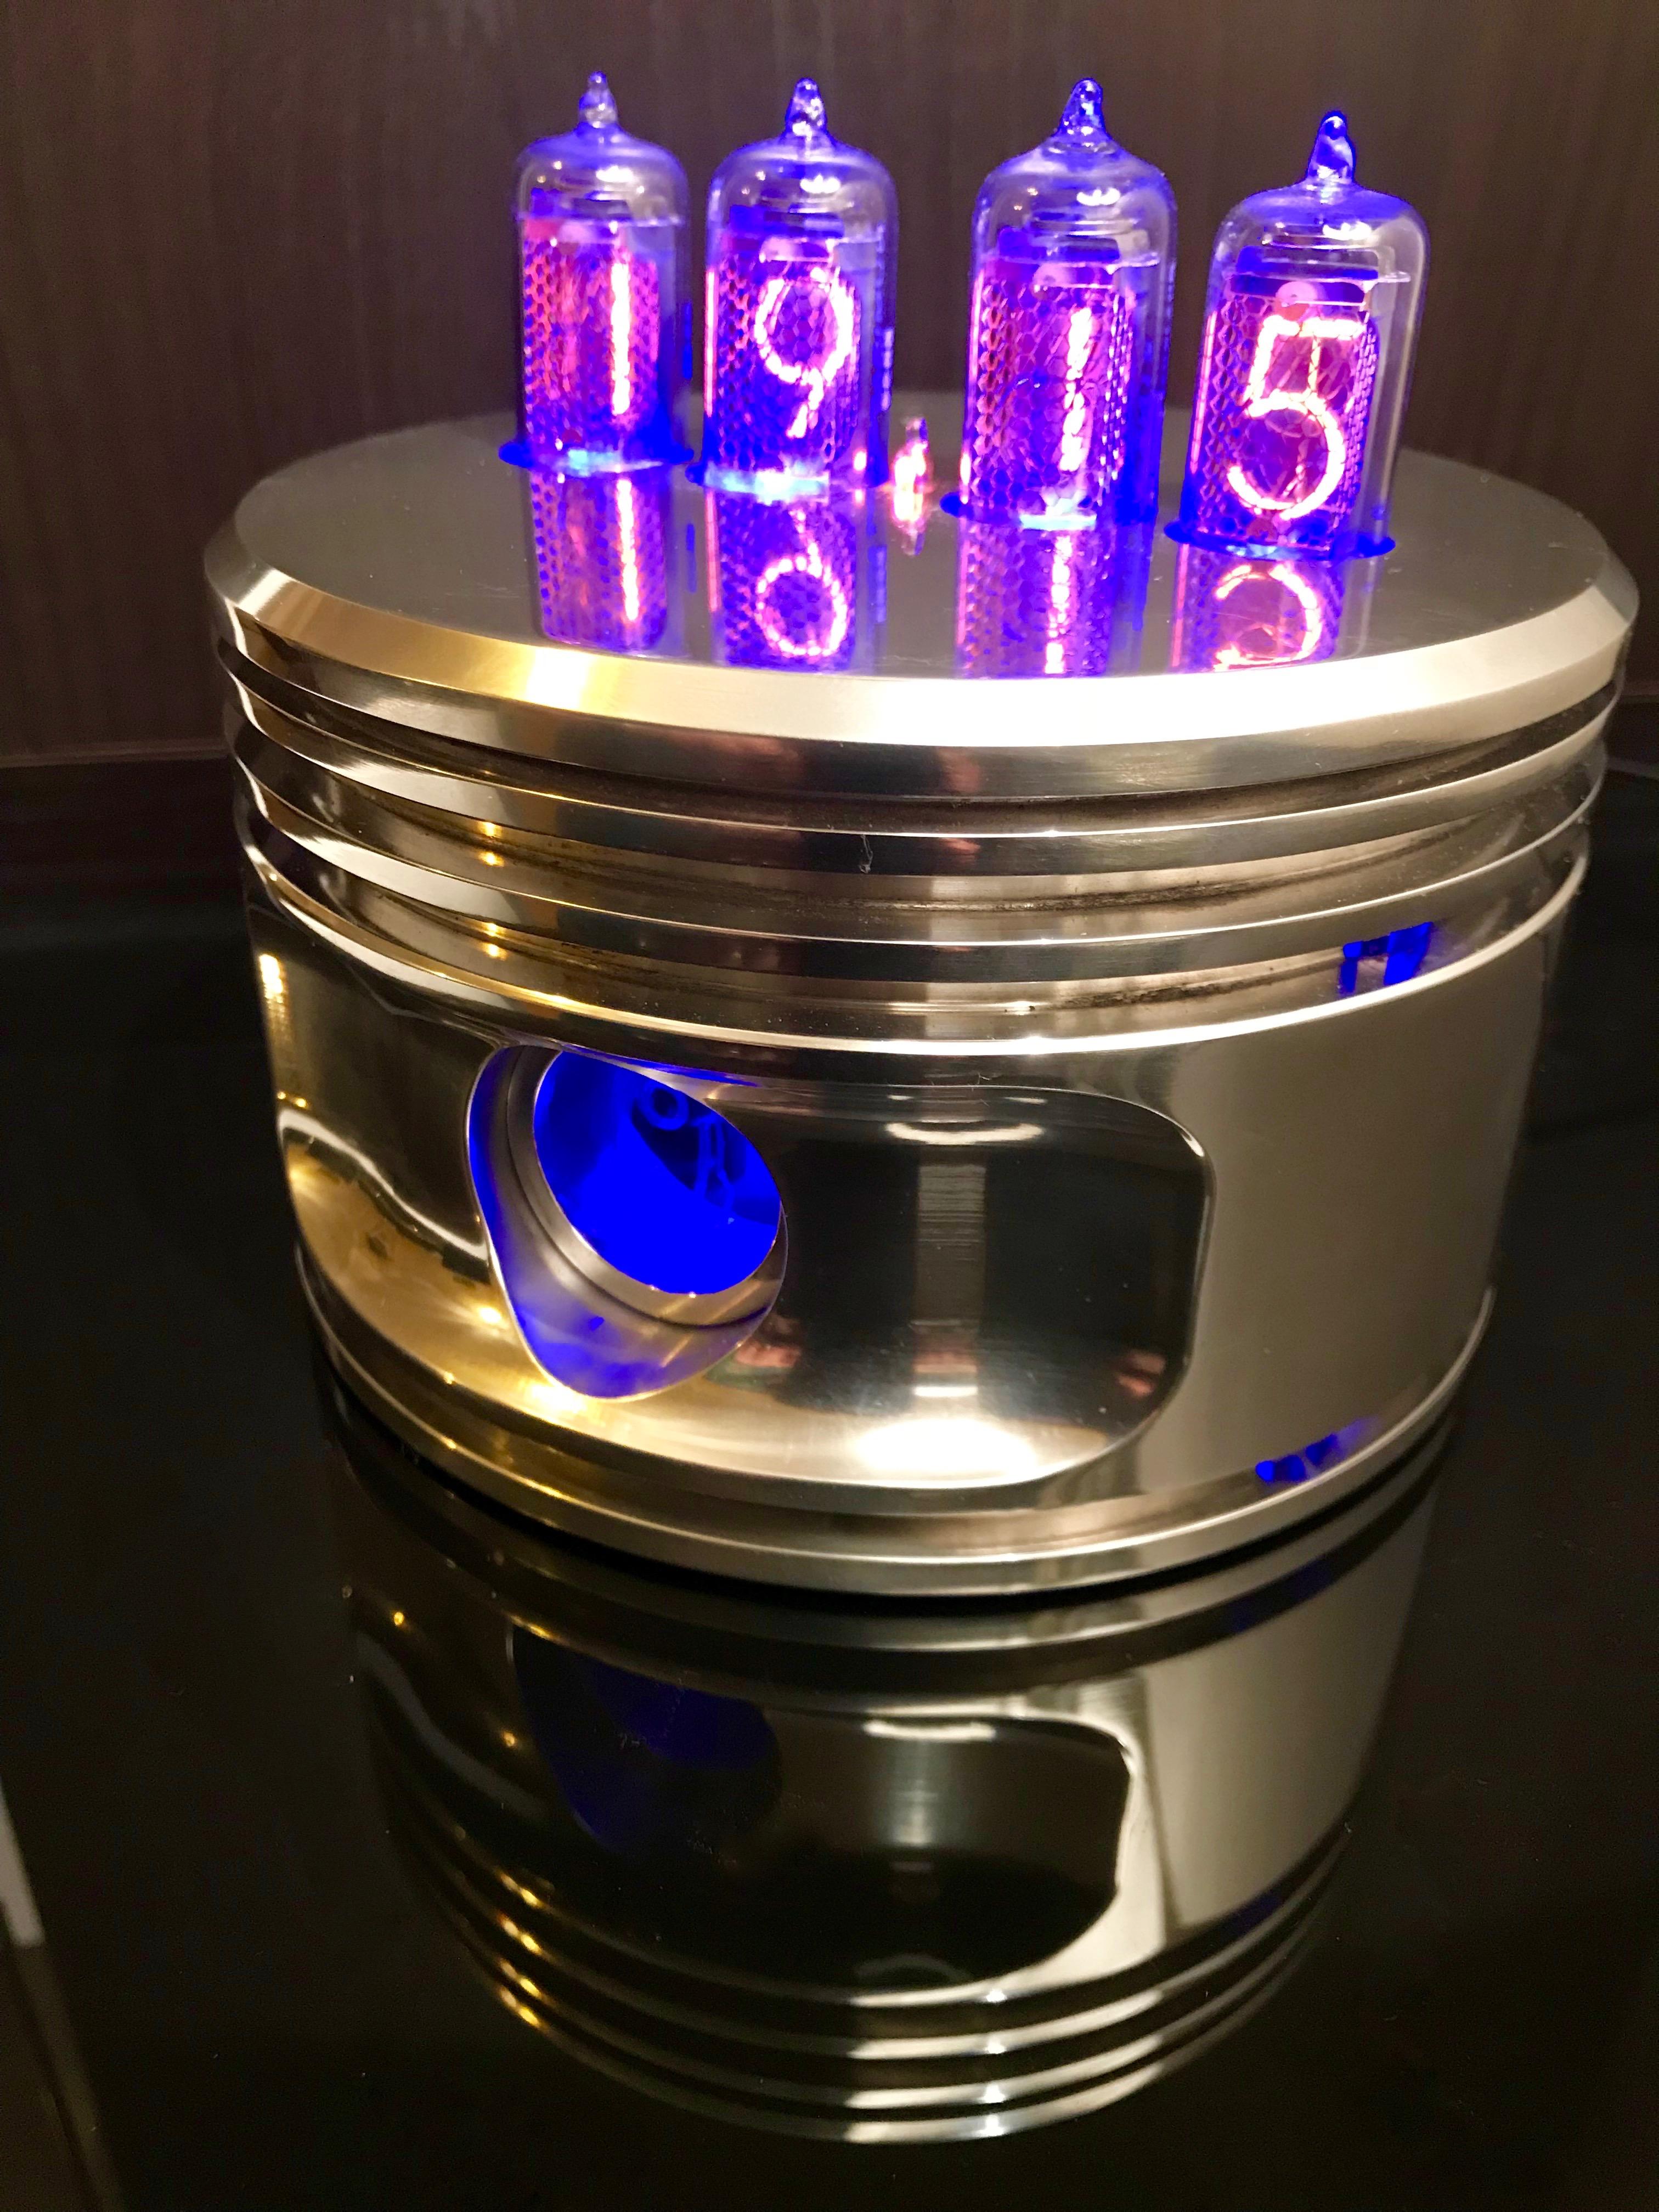 A highly polished Piston from a WWII Jacobs R-755, fitted with 4 Nixie tubes to clearly show the time, 24 or 12 hours with many options such as seconds , night dim, colour display options, brightness etc.

A beautiful unique clock. 
The Nixie